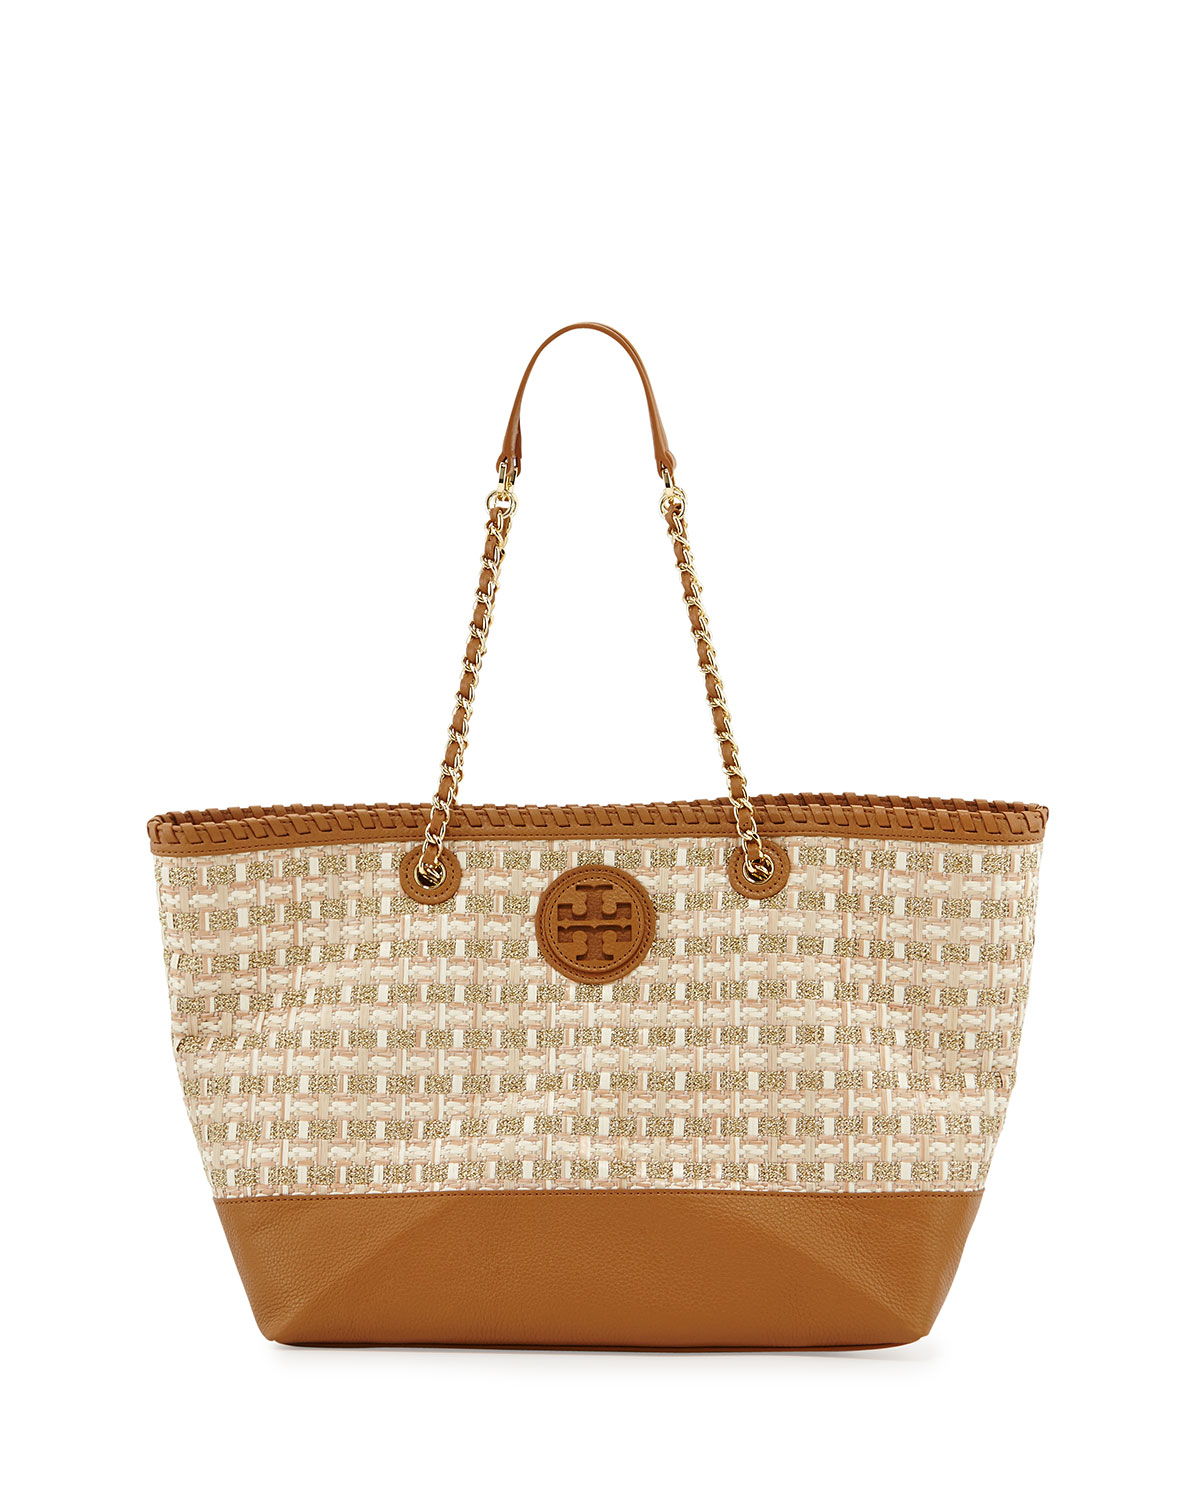 Tory burch Marion Woven Straw Tote Bag in Natural | Lyst